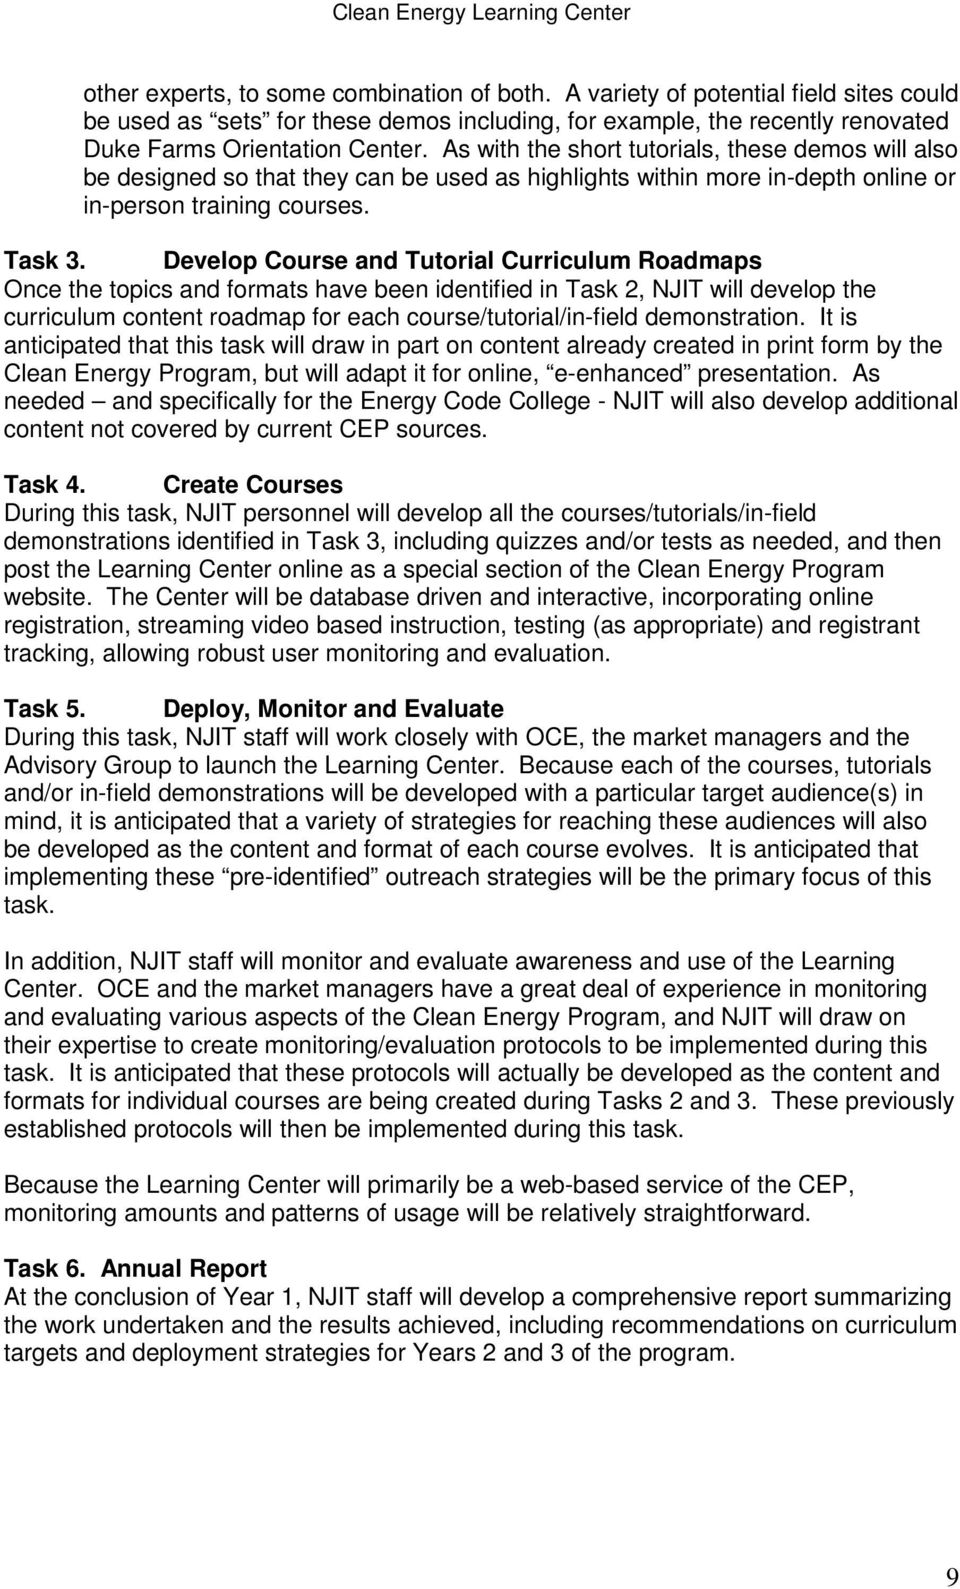 Develop Course and Tutorial Curriculum Roadmaps Once the topics and formats have been identified in Task 2, NJIT will develop the curriculum content roadmap for each course/tutorial/in-field